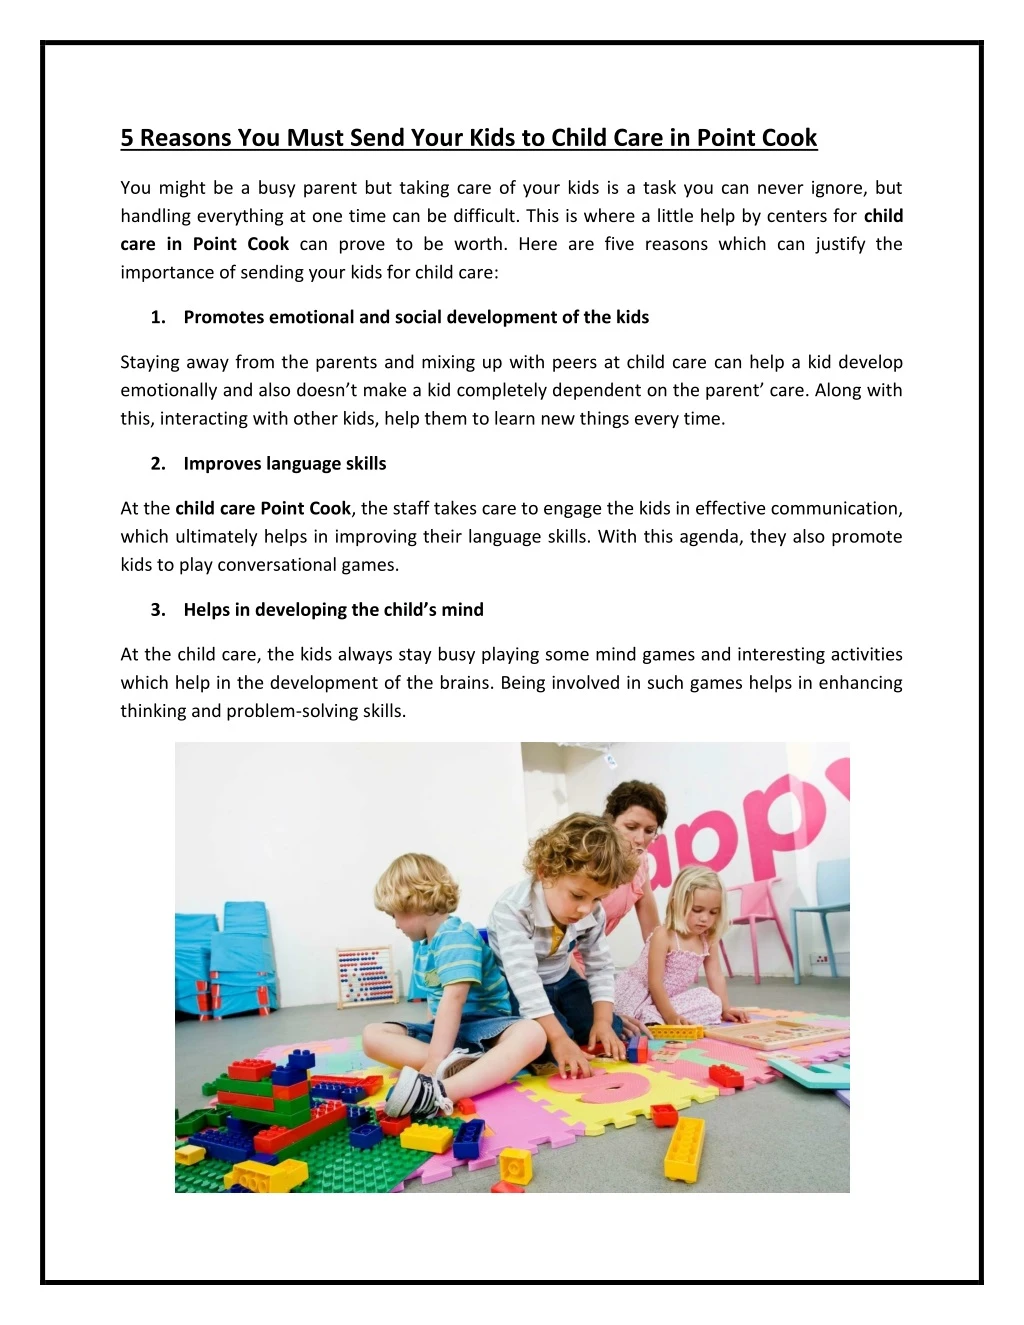 5 reasons you must send your kids to child care